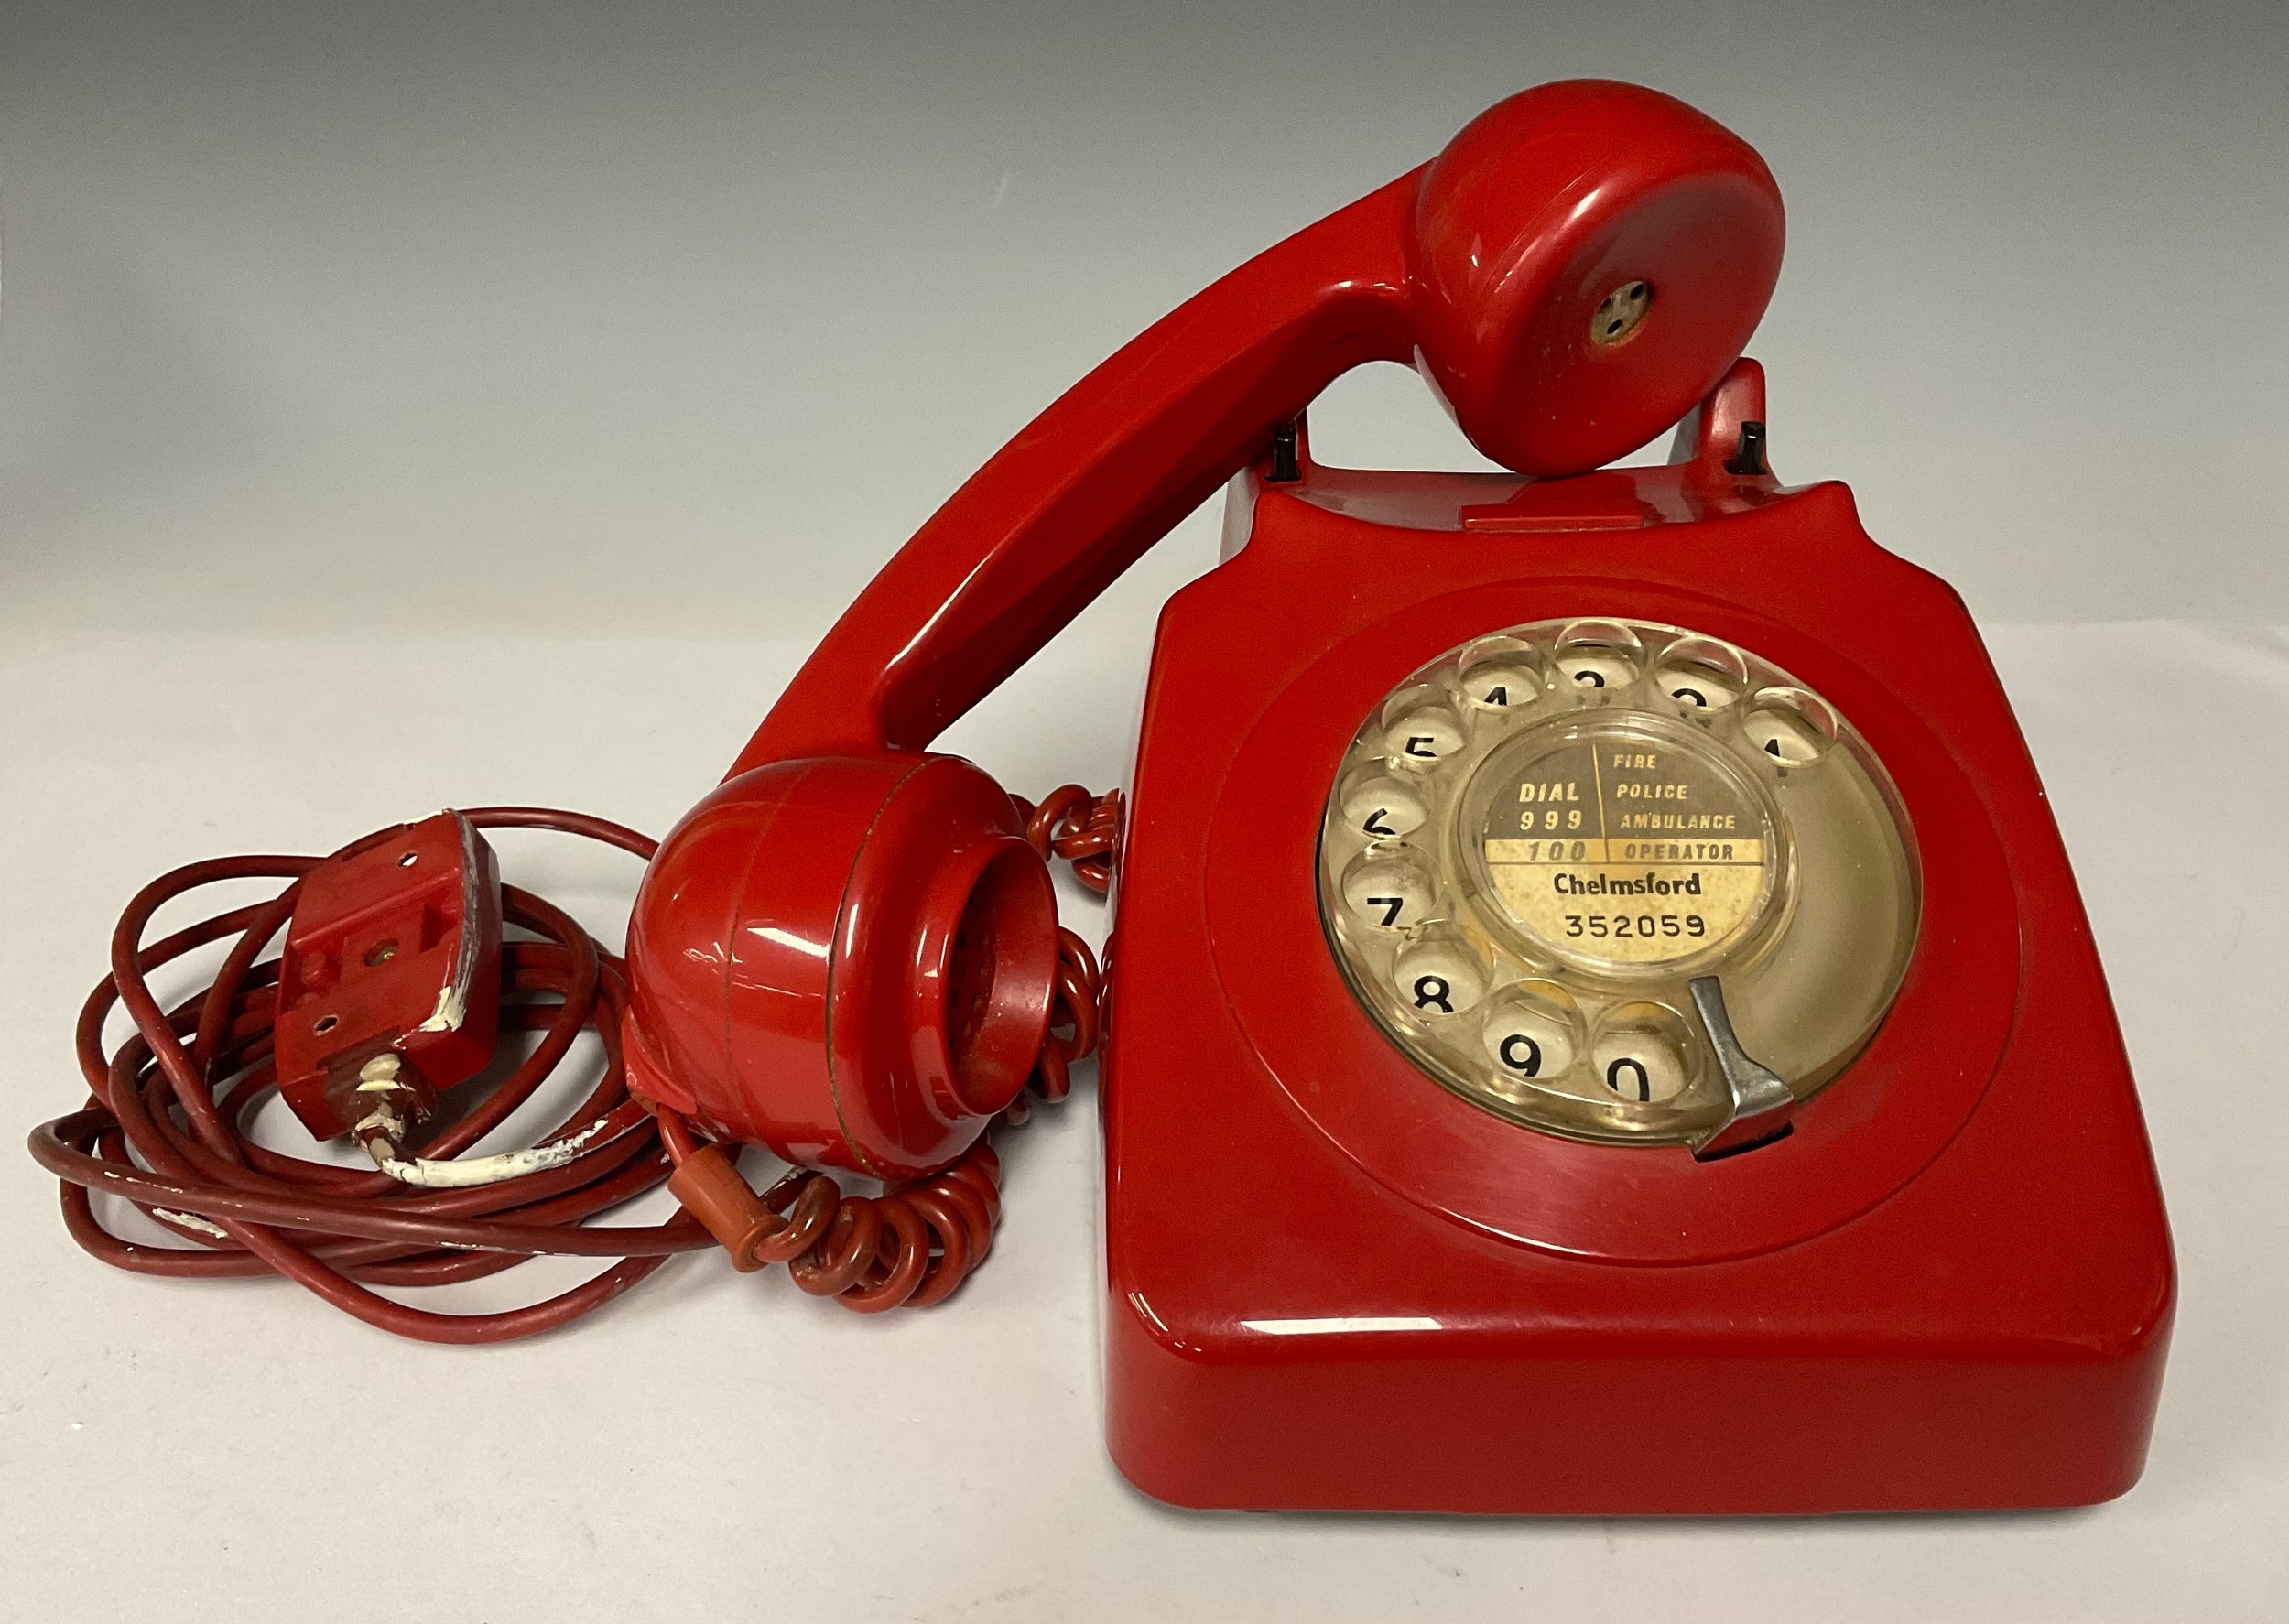 Boxes & Objects - Telephones - a 1960's rotary dial telephone, model 746F SPK 72/1, in red